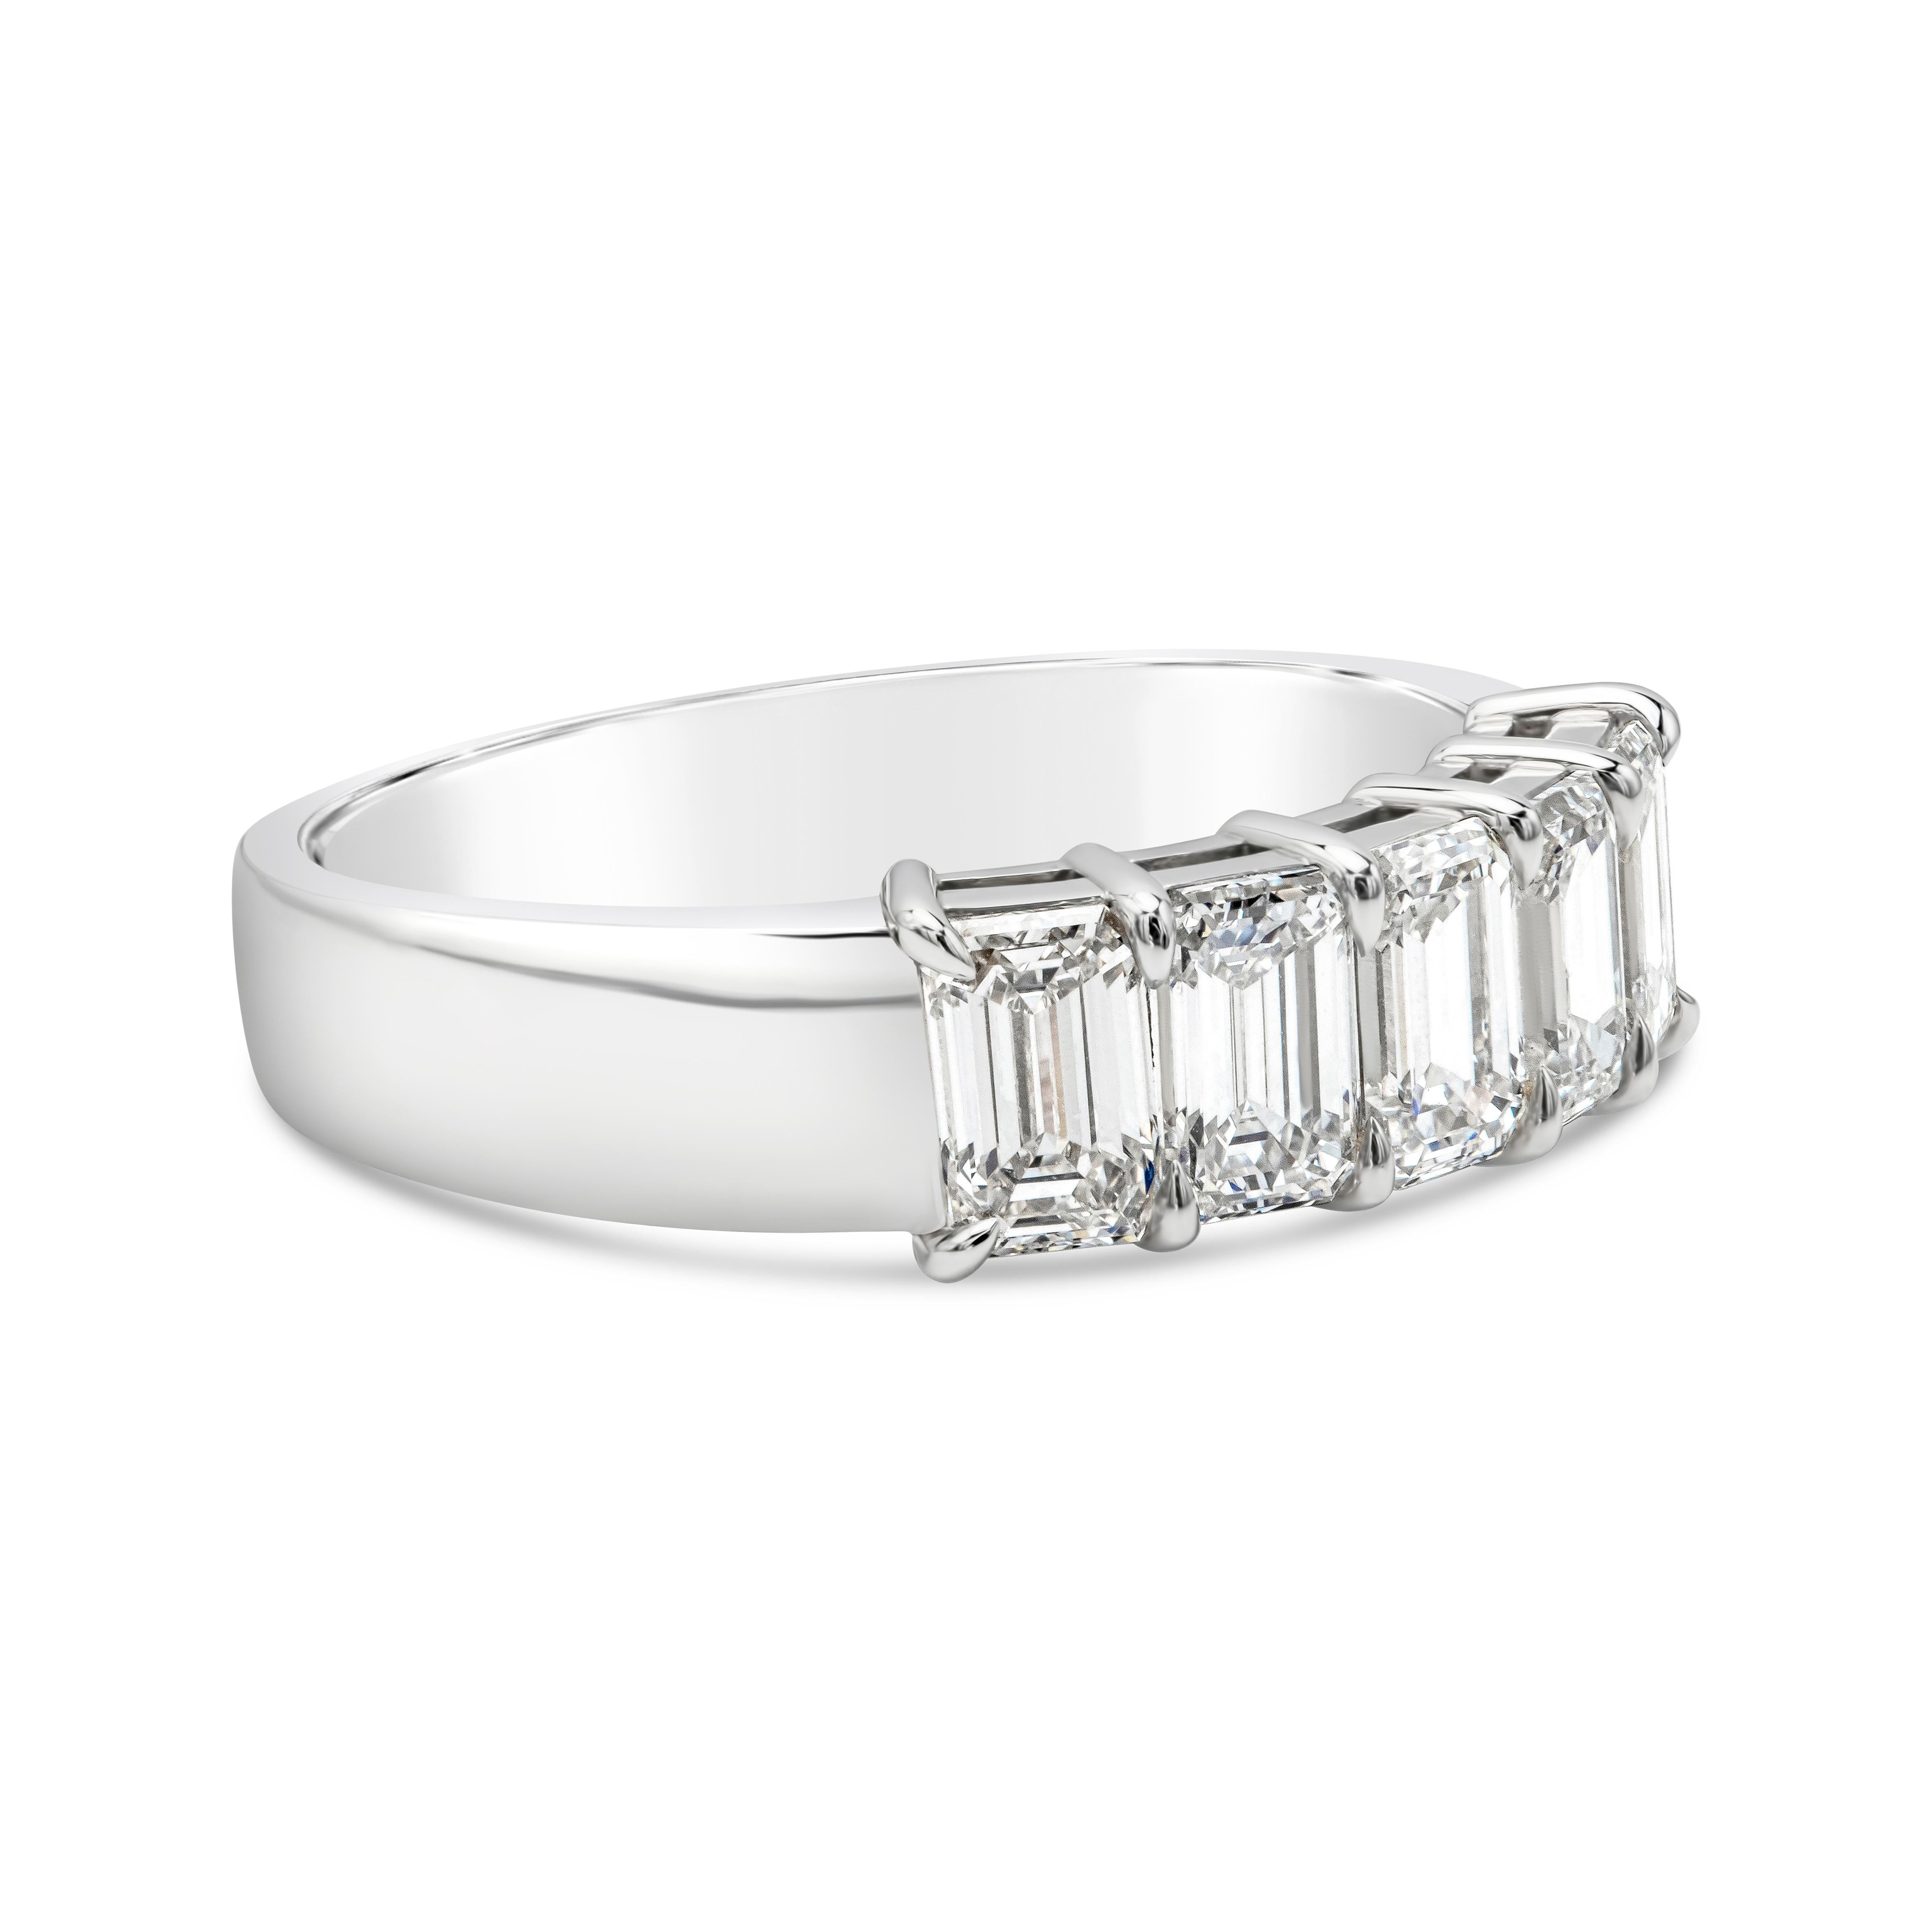 This gorgeous wedding band ring features 5 emerald cut diamonds weighing 1.80 carats total, D-E Color and VS in clarity. Set in a timeless shared prong setting and Finely made in Platinum, Size 6.75 US resizable upon request and 5.86mm in